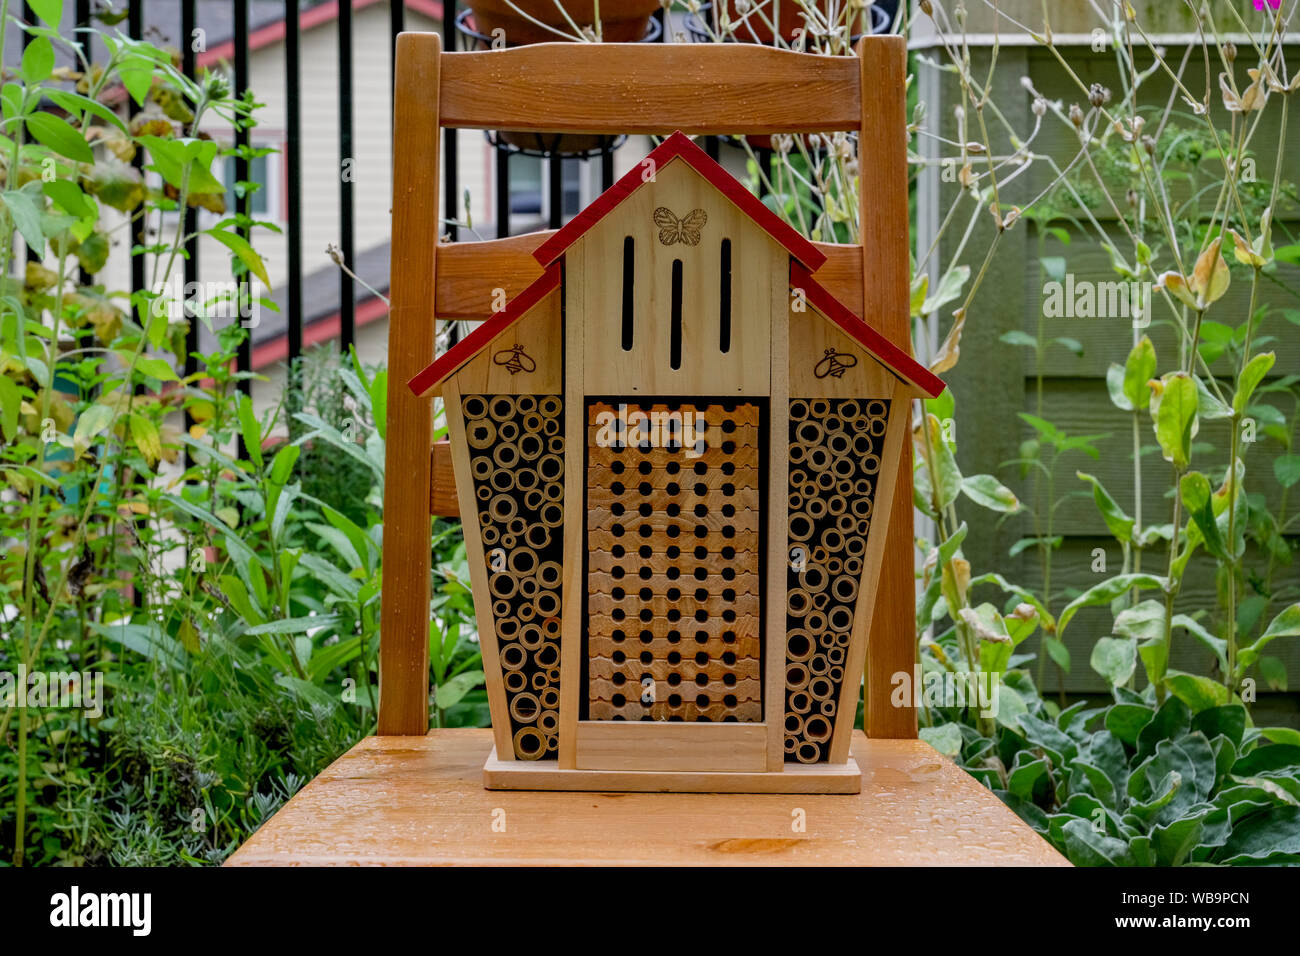 Wasp house, beneficial, Insect hotel, to encourage pollinators Stock Photo